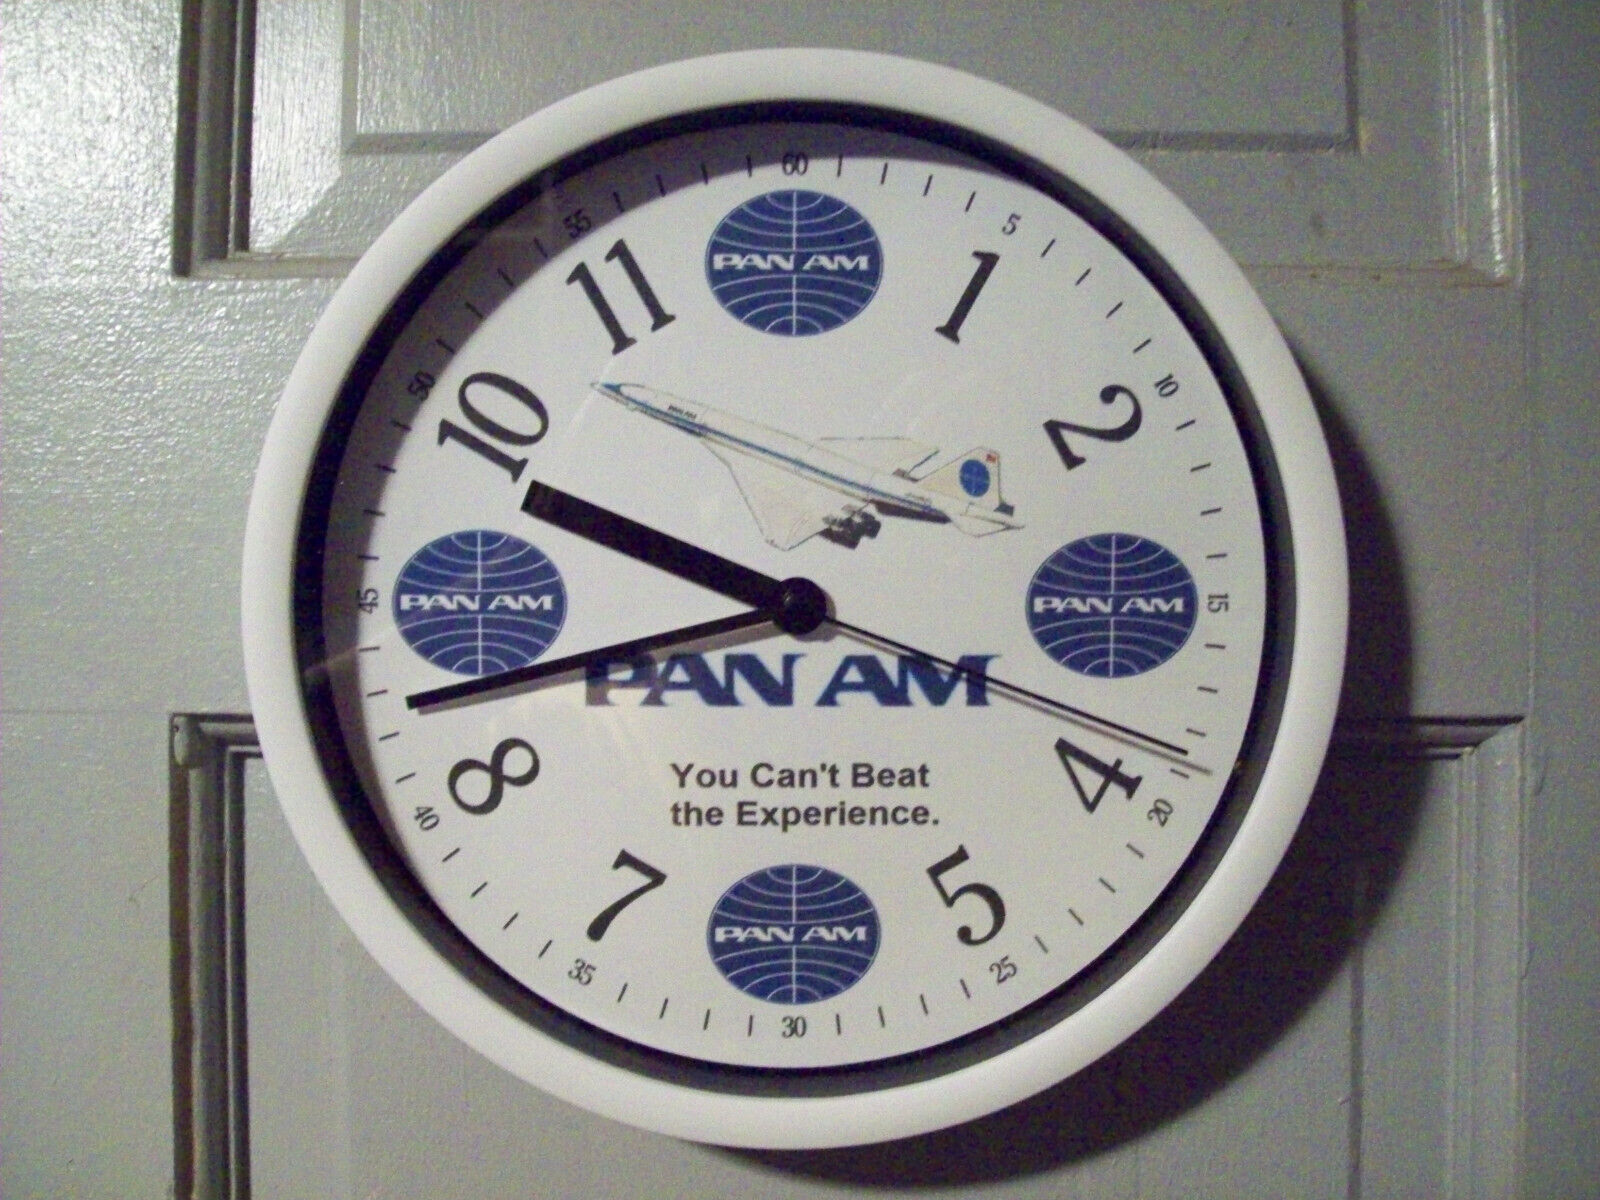 PAN AM BOEING 7207 CLOCK SST NATIONAL AIRLINES